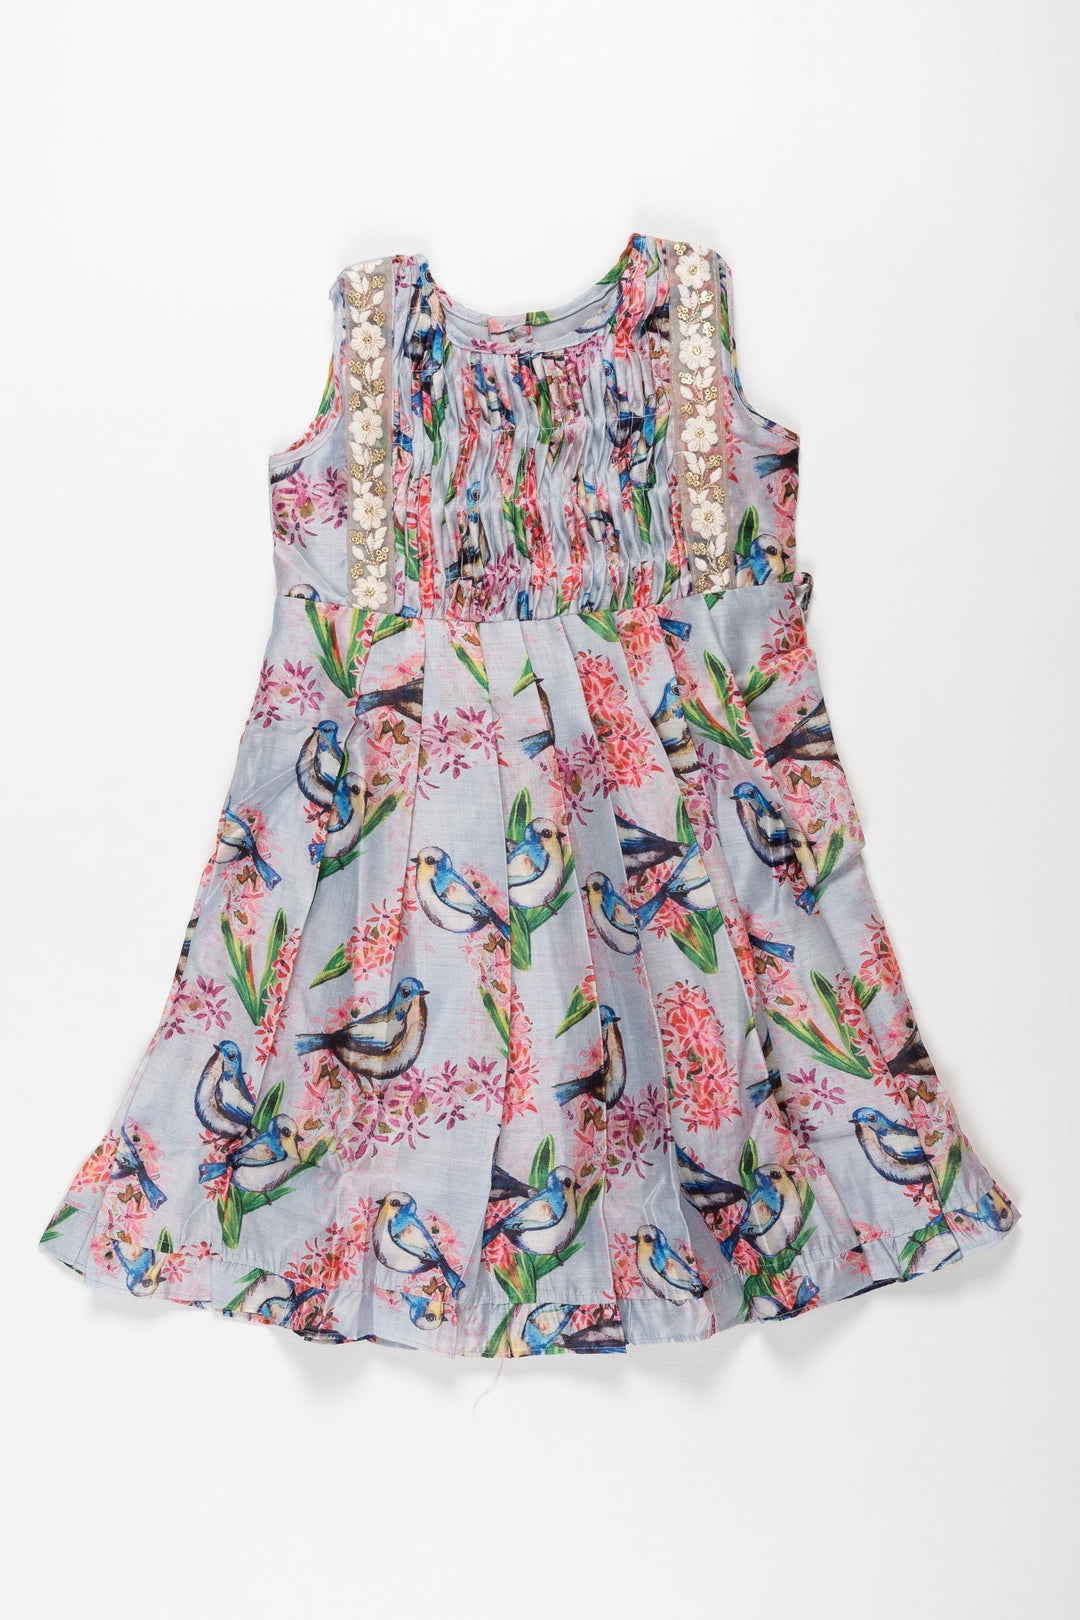 The Nesavu Girls Cotton Frock Charming Bird & Floral Printed Cotton Frock for Girls - Fresh Spring Collection Nesavu 12 (3M) / Gray / Cotton GFC1201B-12 Girls Designer Cotton Print Frocks | Unique Casual Styles for Play | The Nesavu